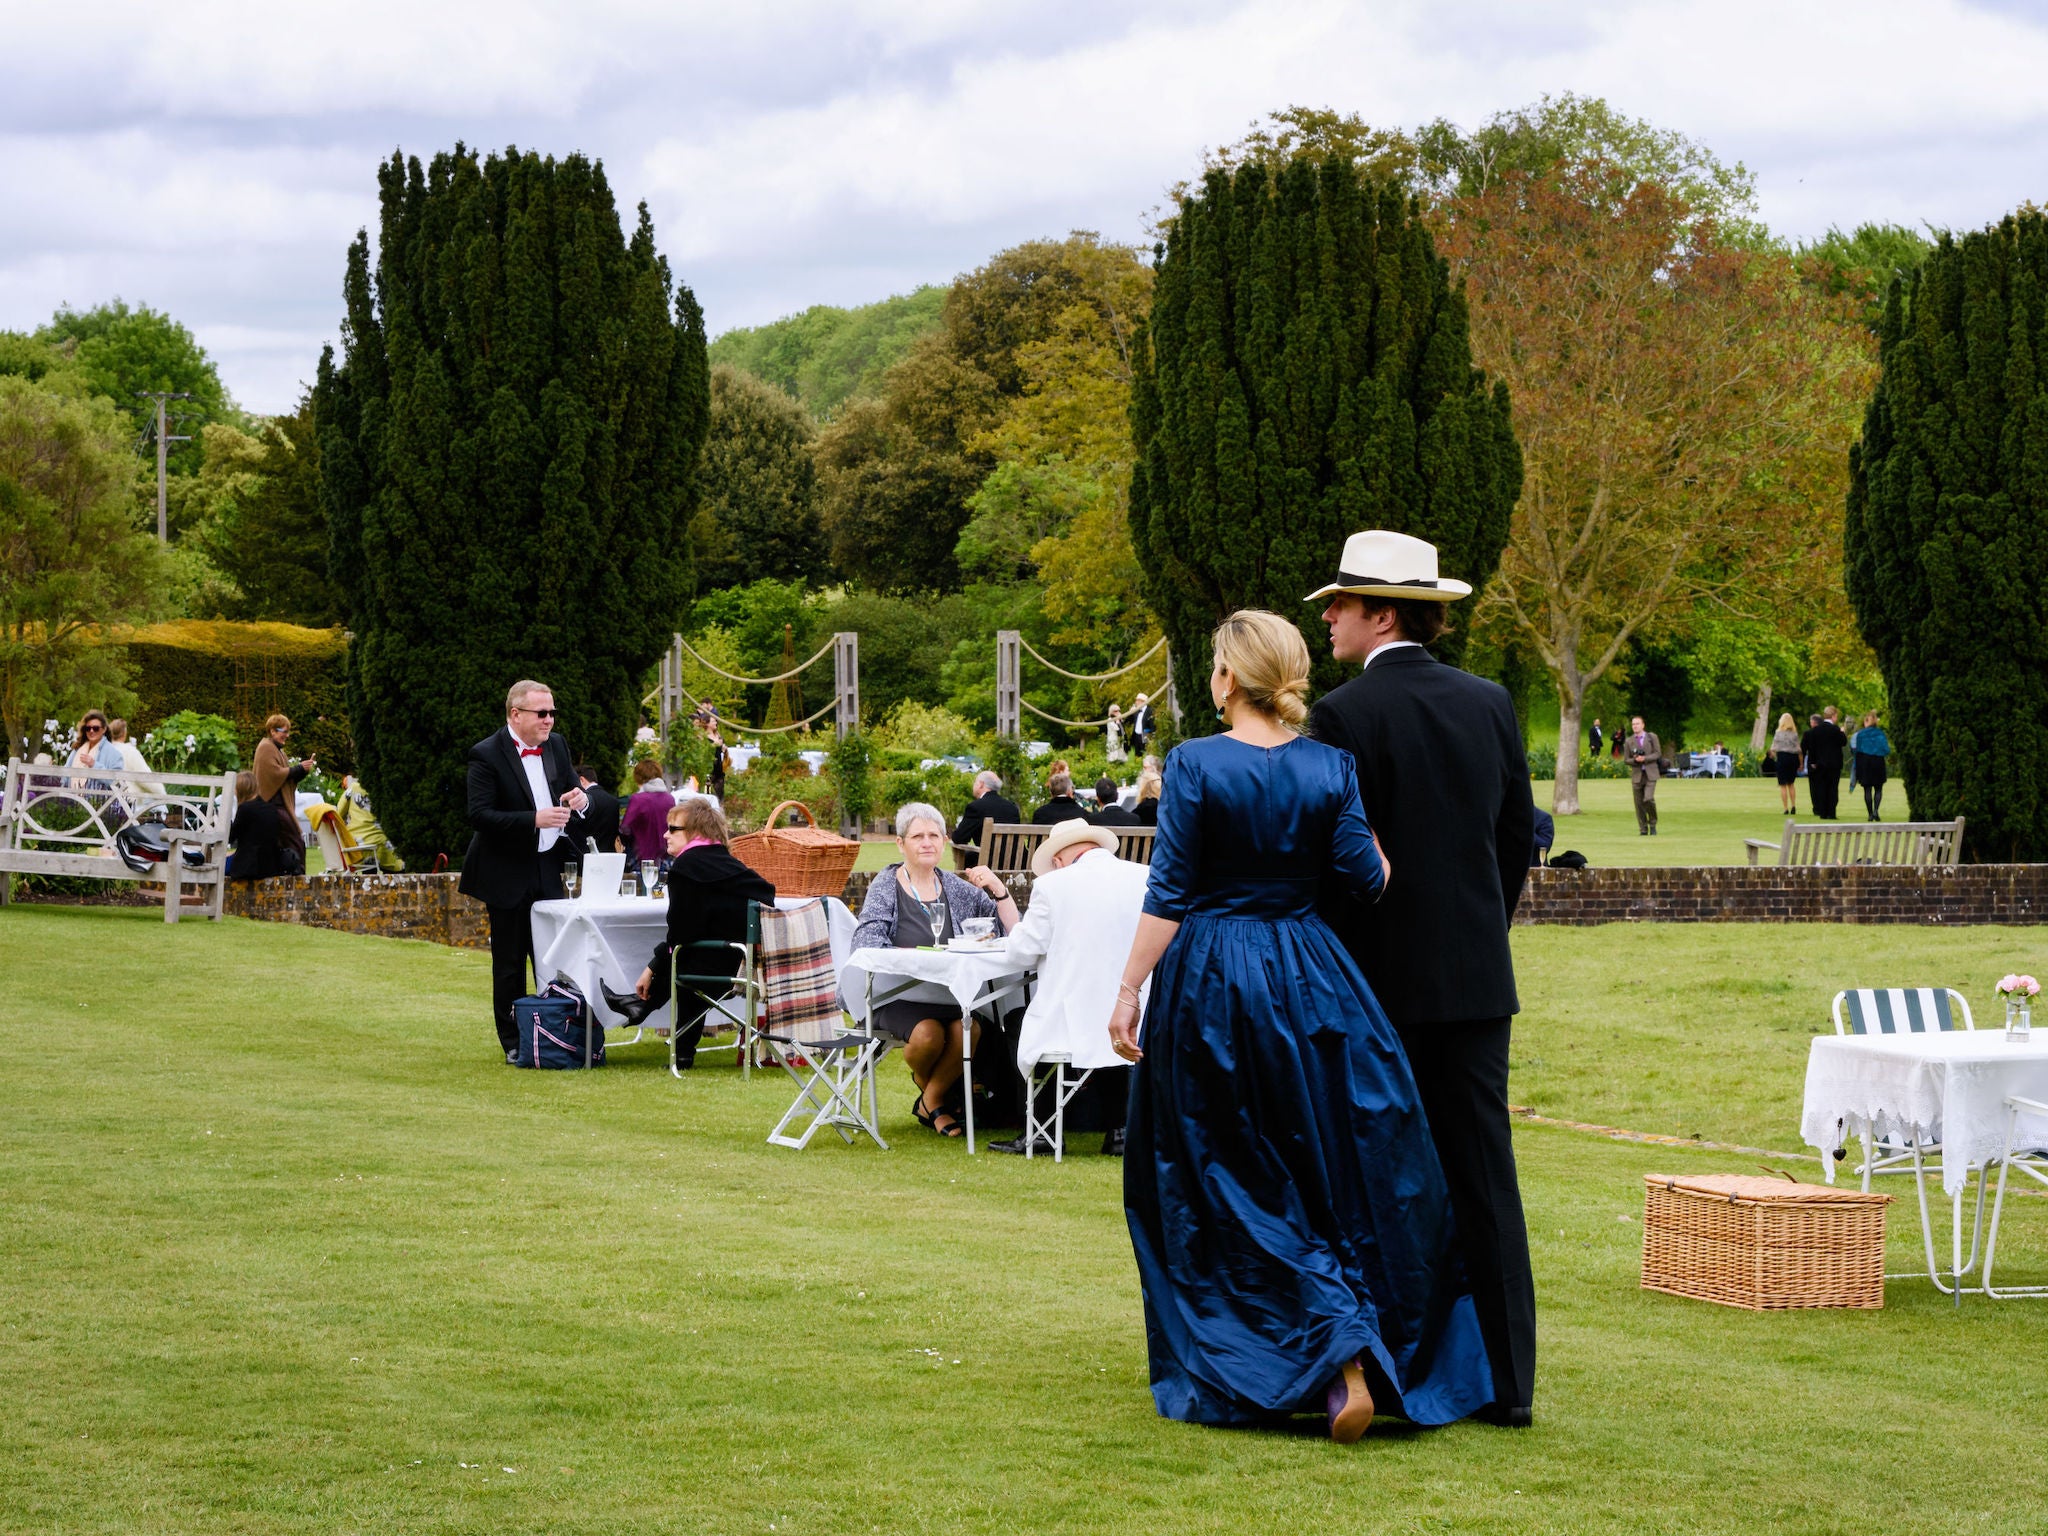 High notes and hampers: the Sussex Downs estate has been welcoming opera lovers for the last 90 years